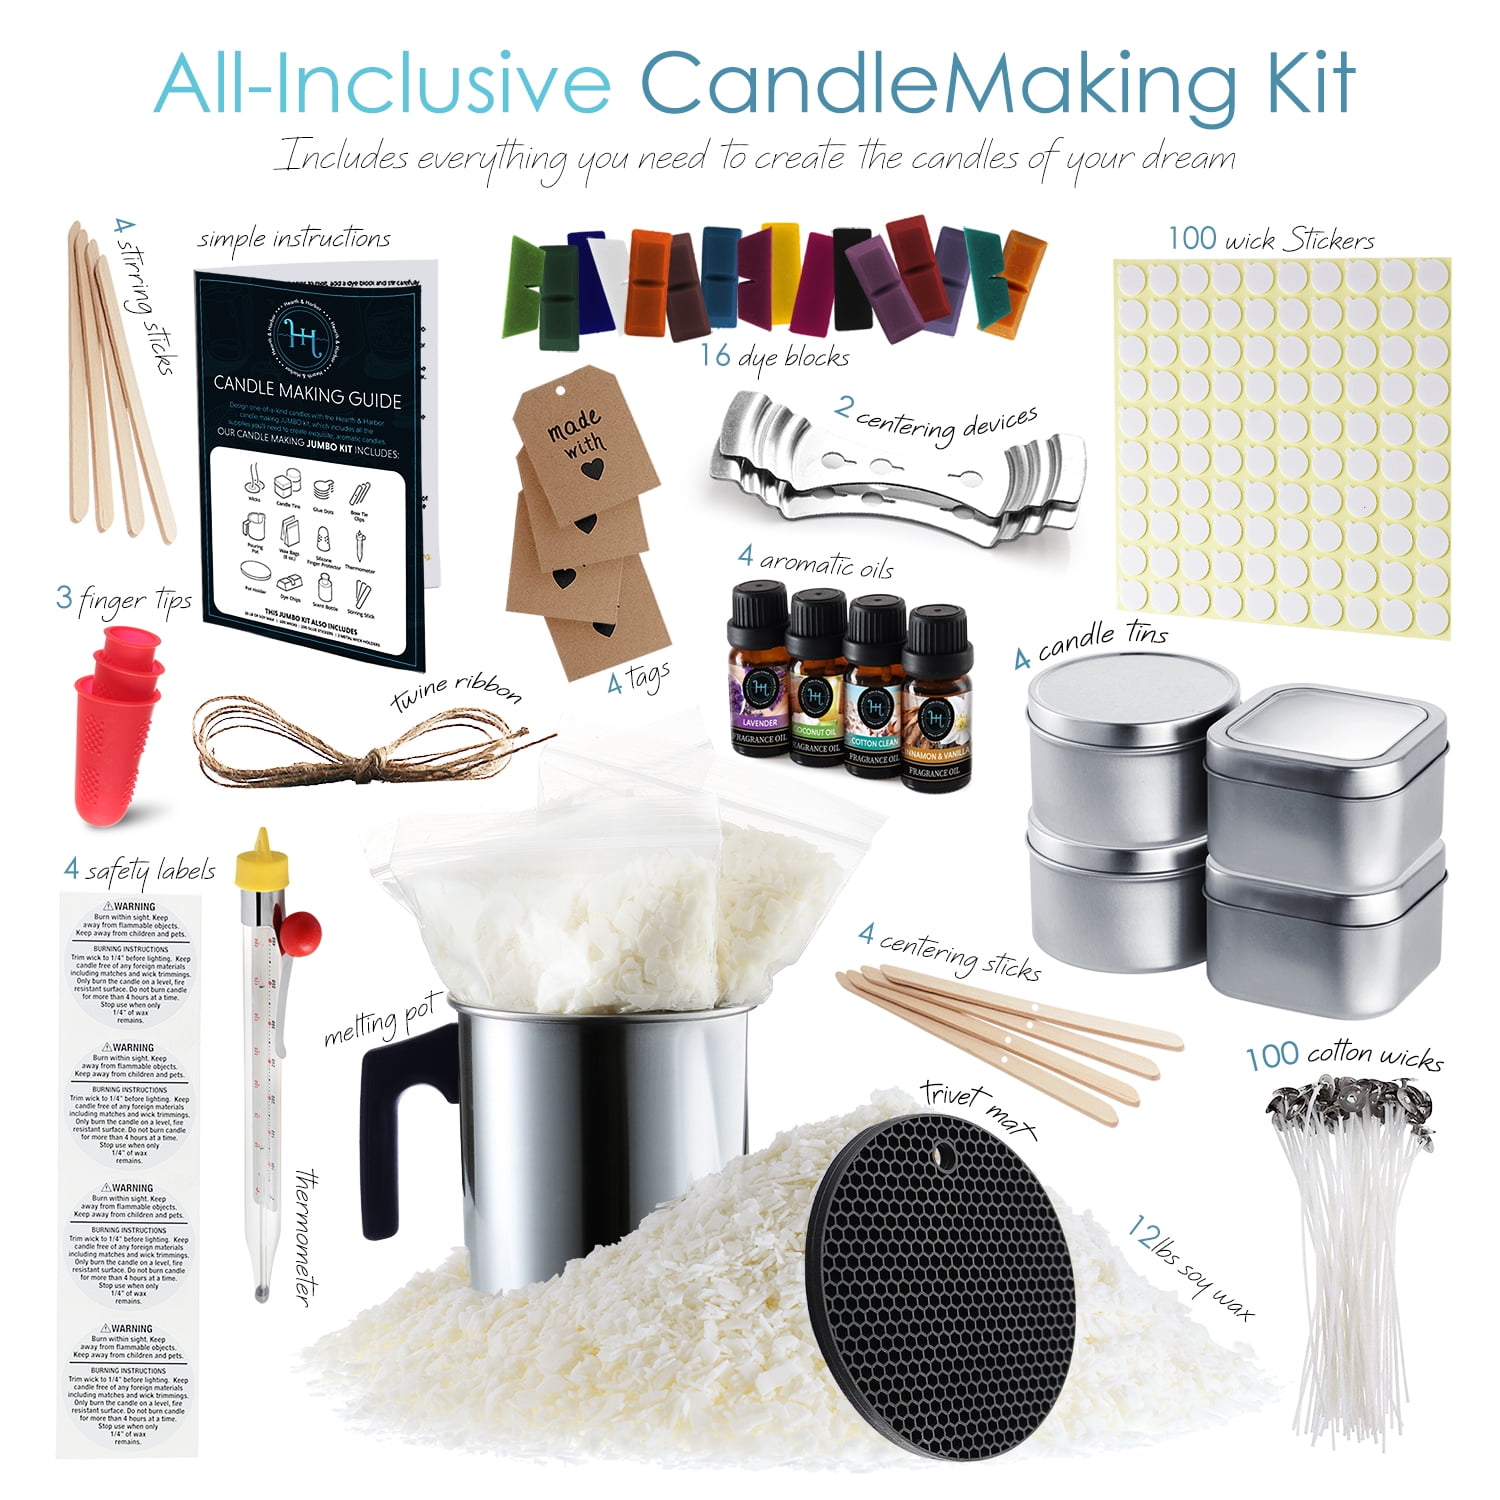 SkyMall Candle Making Kit, DIY Set Includes Melting Pot, 4 Metal Tins,4 x  5oz Soy Wax Bags, 4 Color Dye Blocks, 4 Fragrance Oils, Wicks, Thermometer